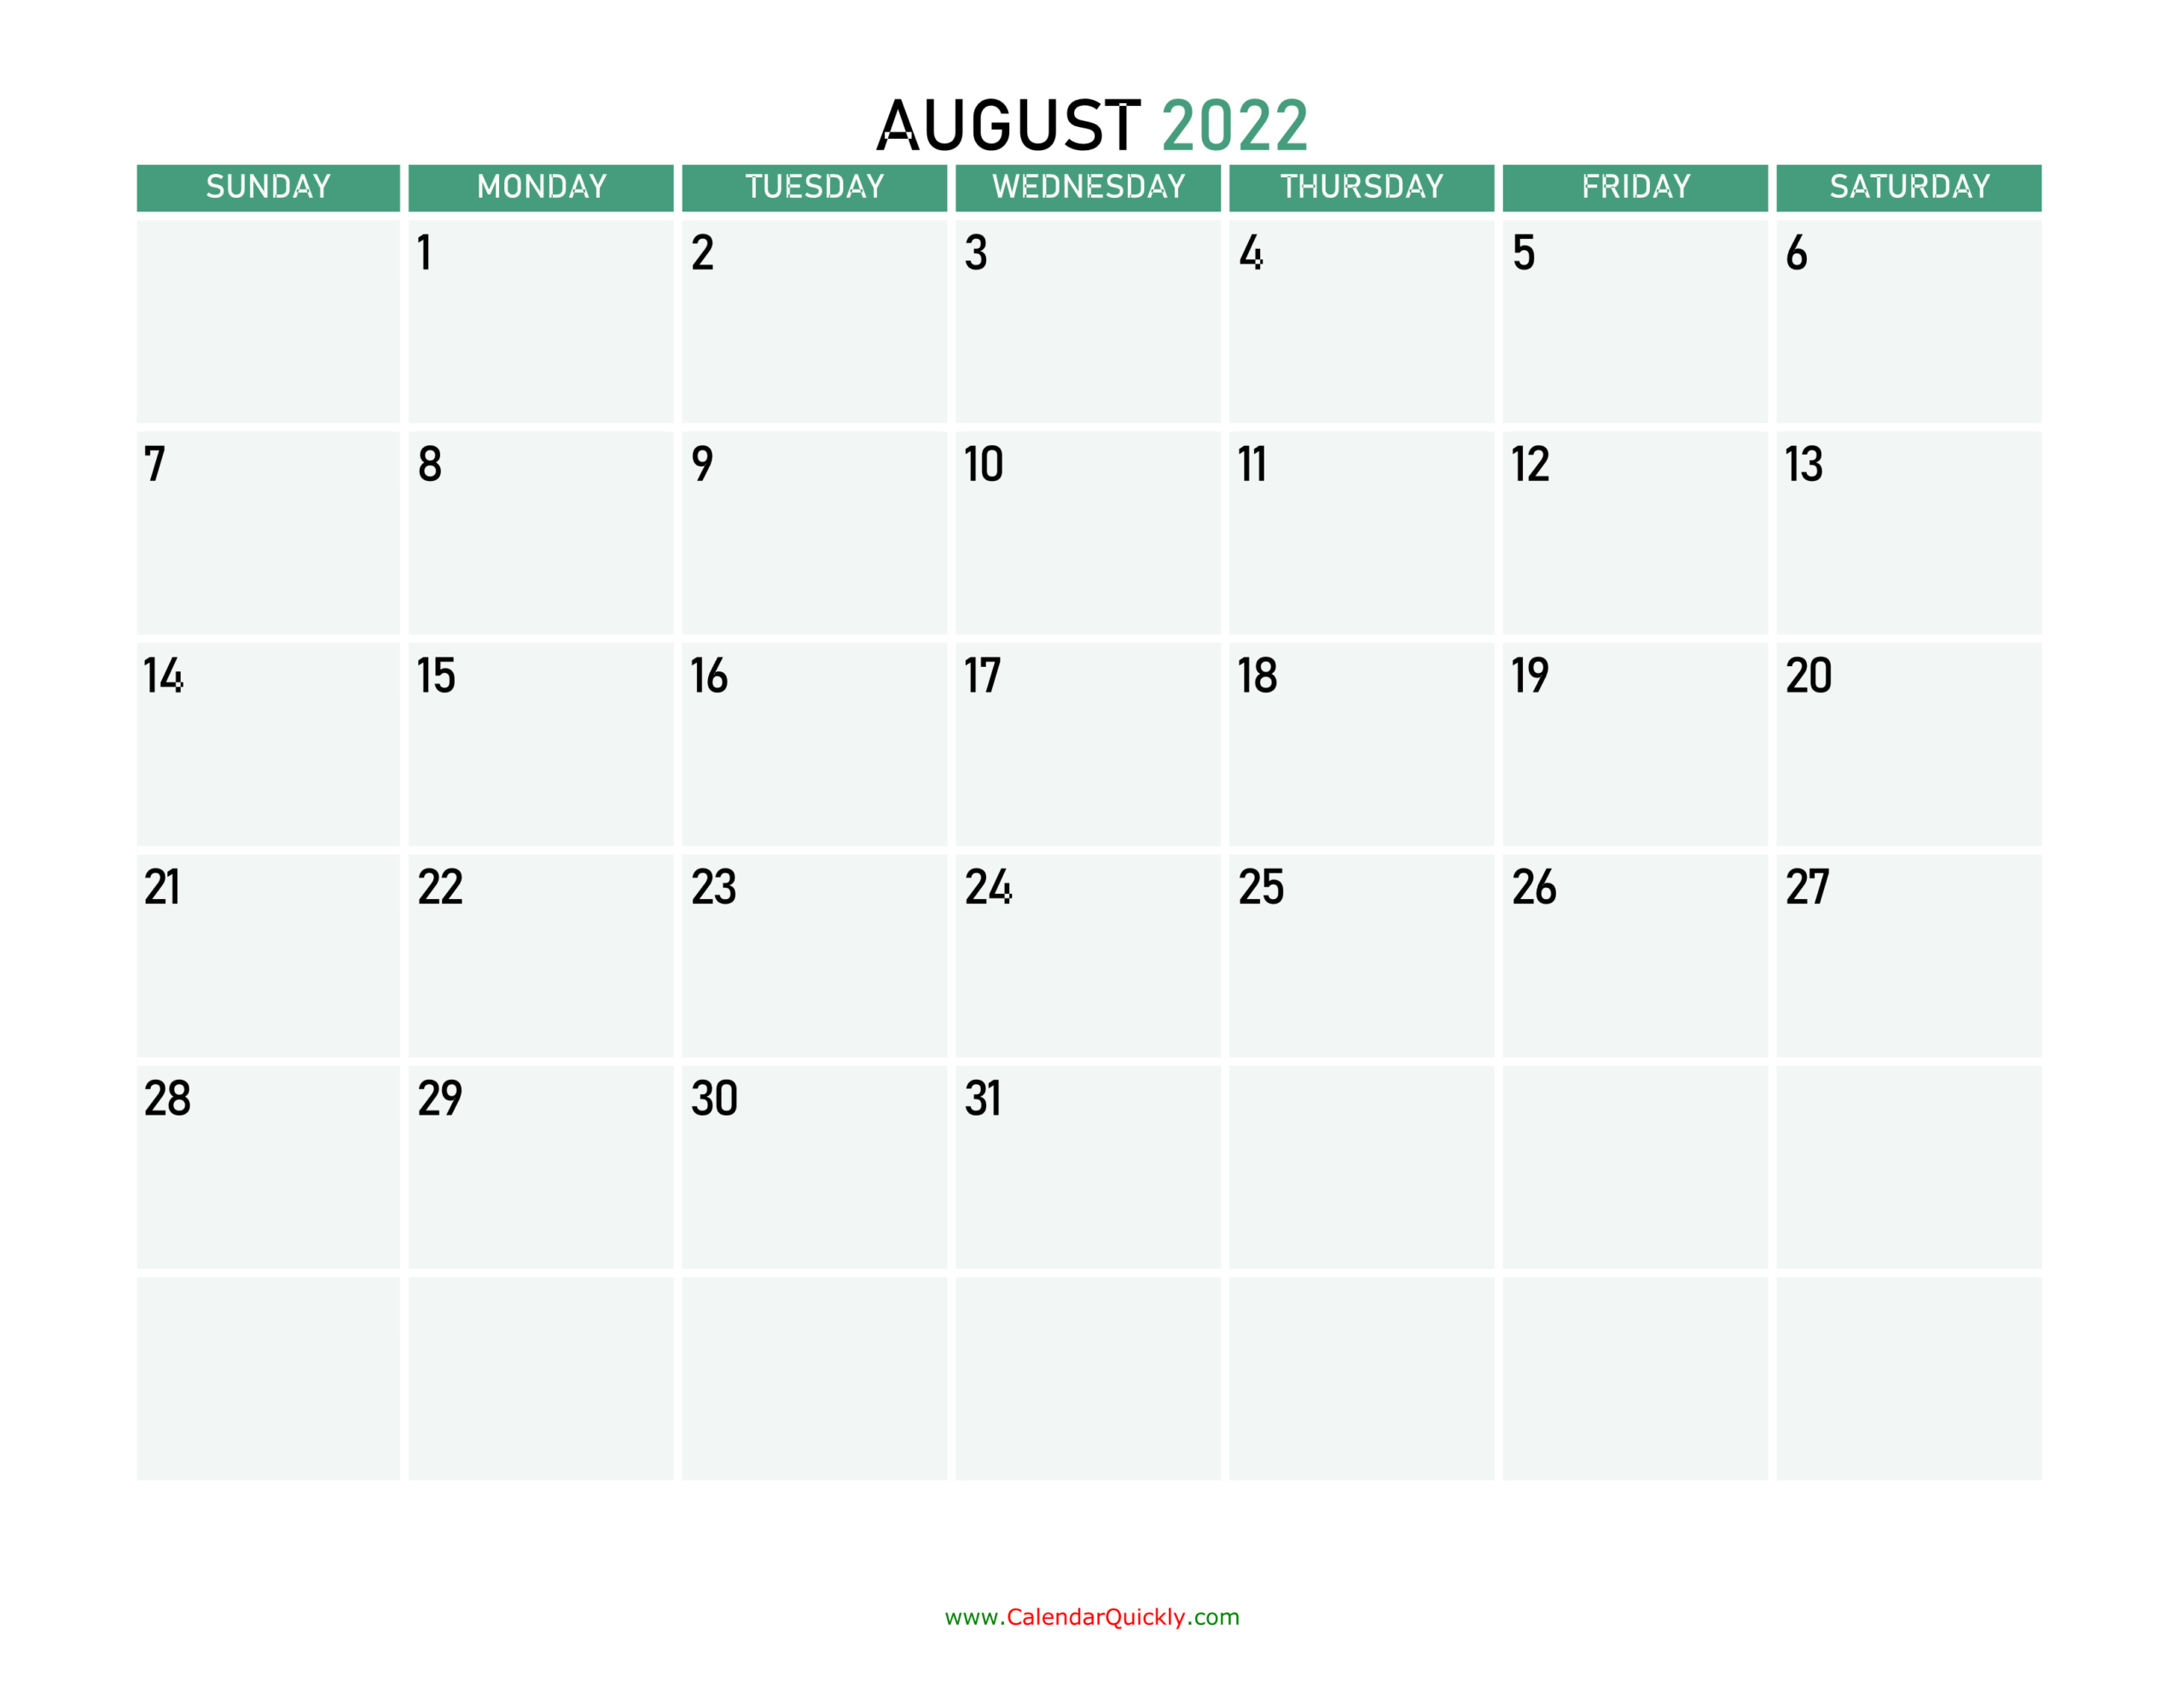 Get Calendar For July And August 2022